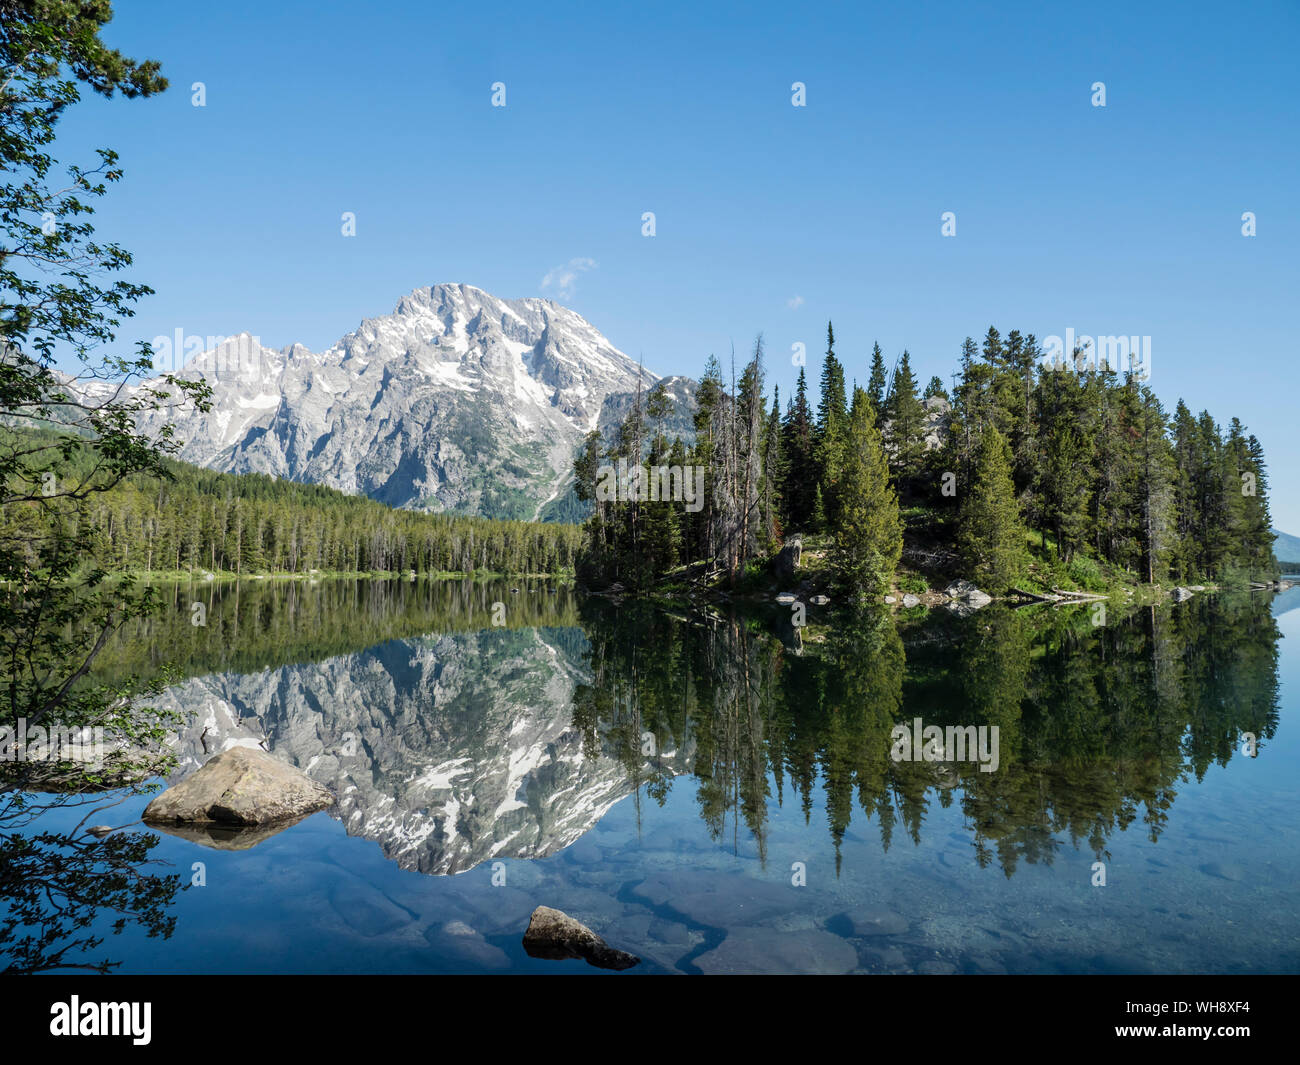 Snow-capped mountains reflected in the calm waters of Leigh Lake, Grand Teton National Park, Wyoming, United States of America, North America Stock Photo